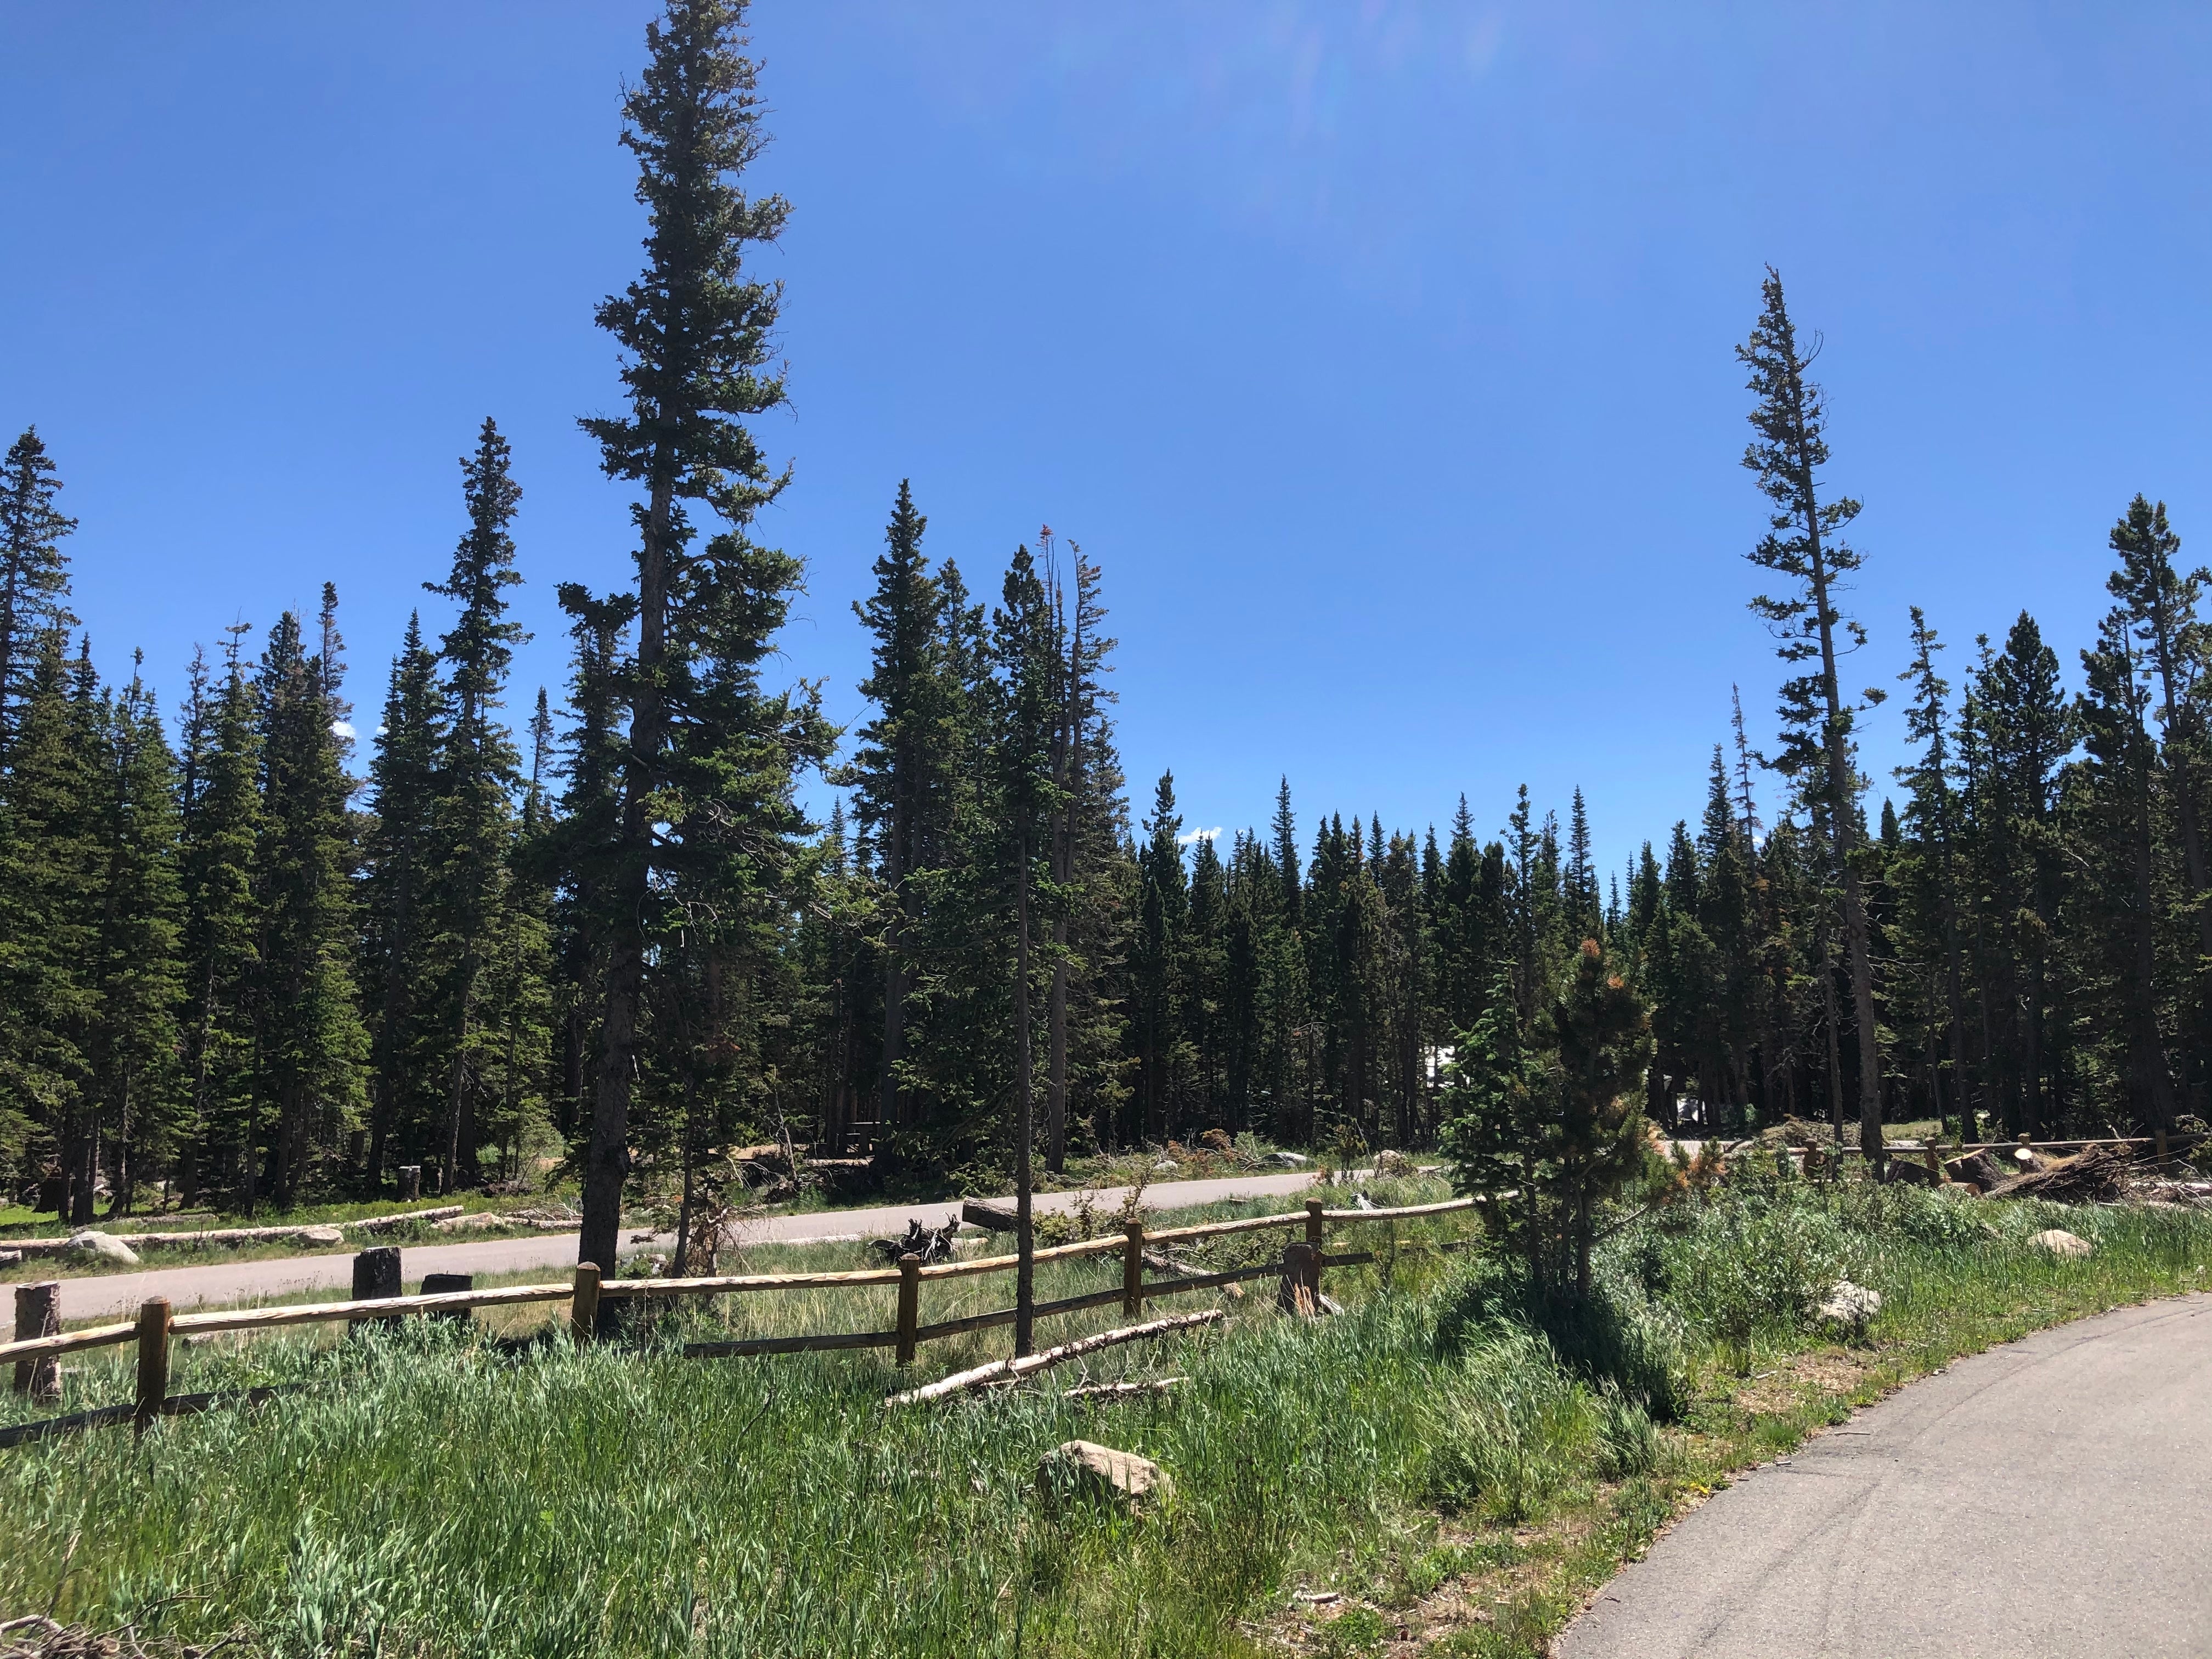 Camper submitted image from Brainard Lake Recreation Area - 5